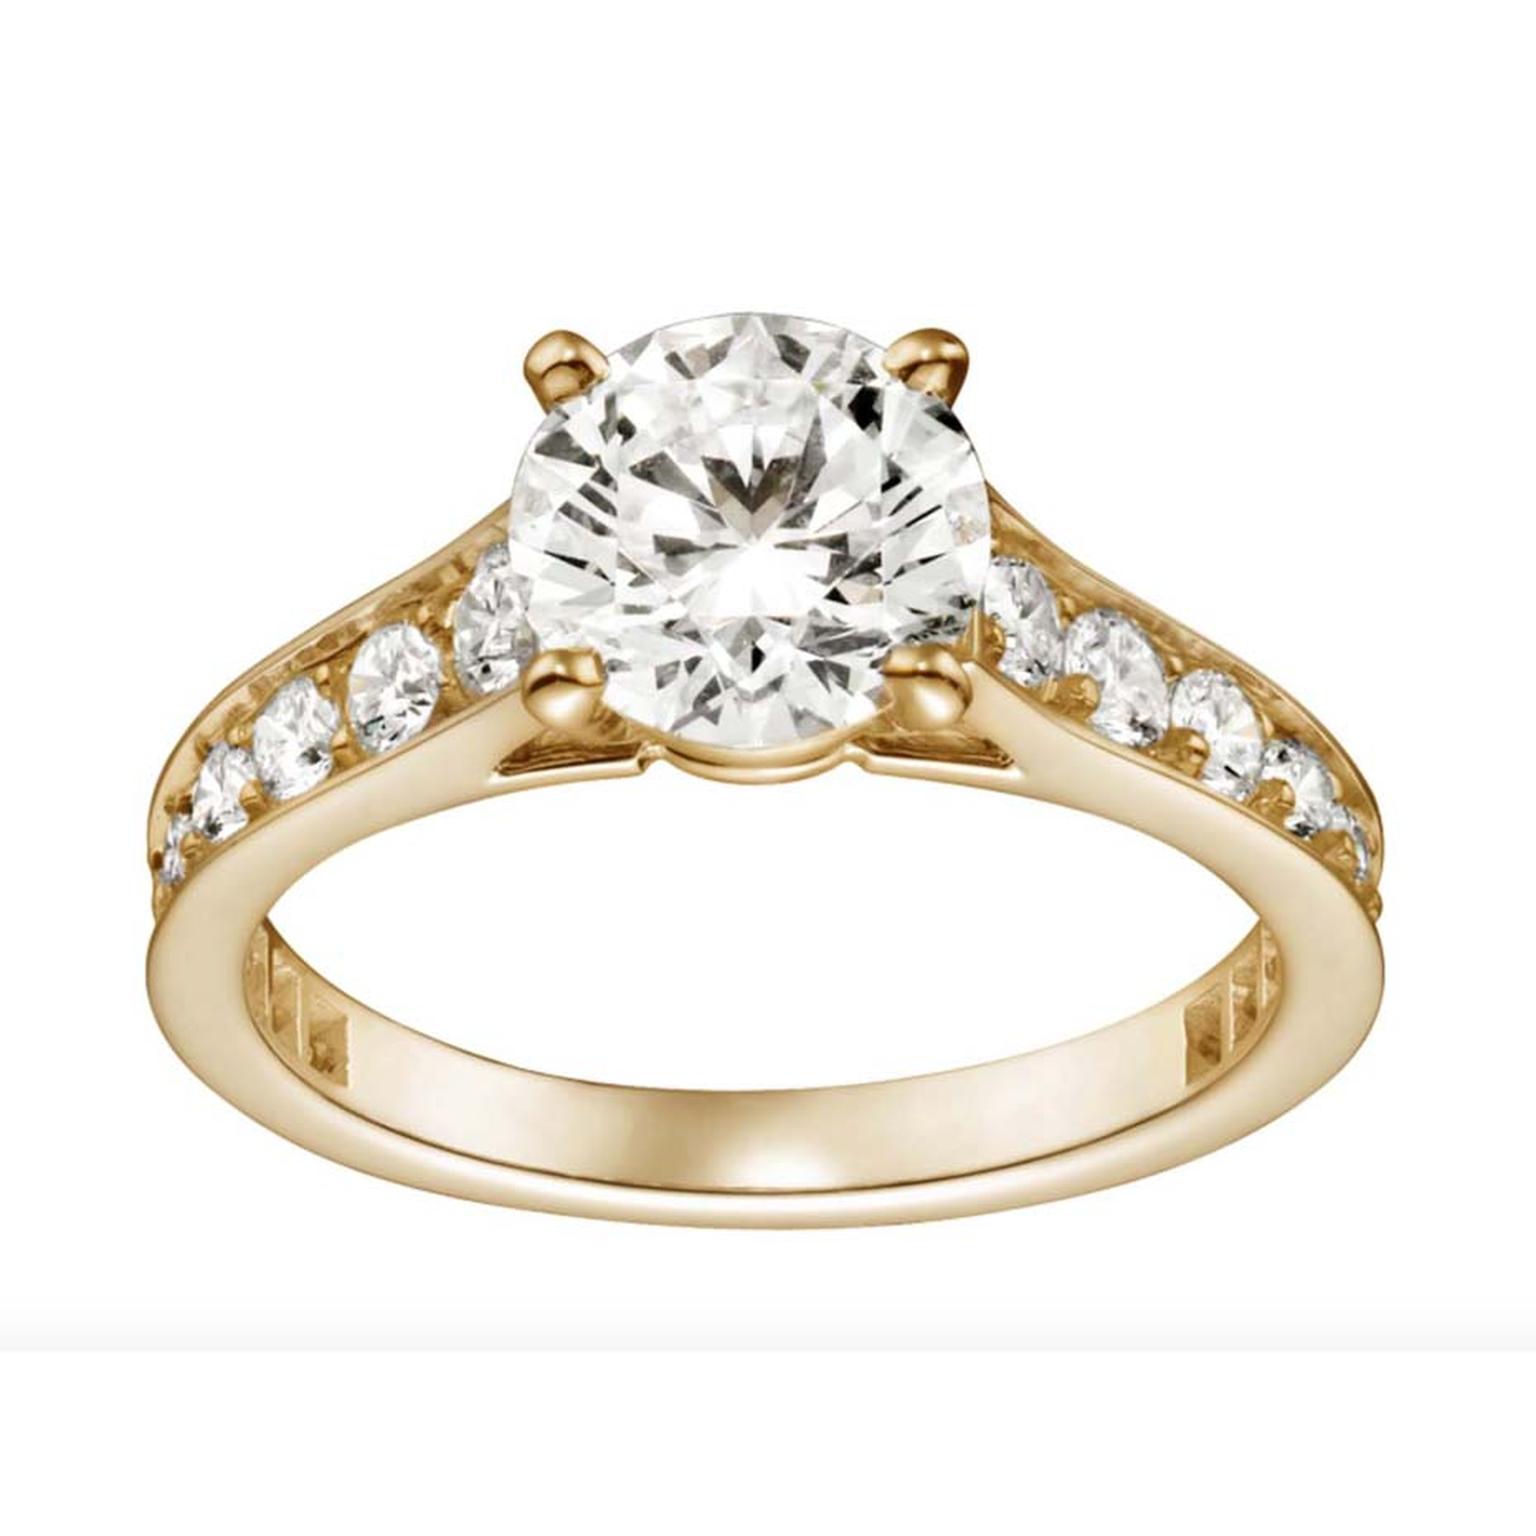 Cartier Solitaire 1895 diamond engagement ring in yellow gold, set with brilliant-cut diamonds.